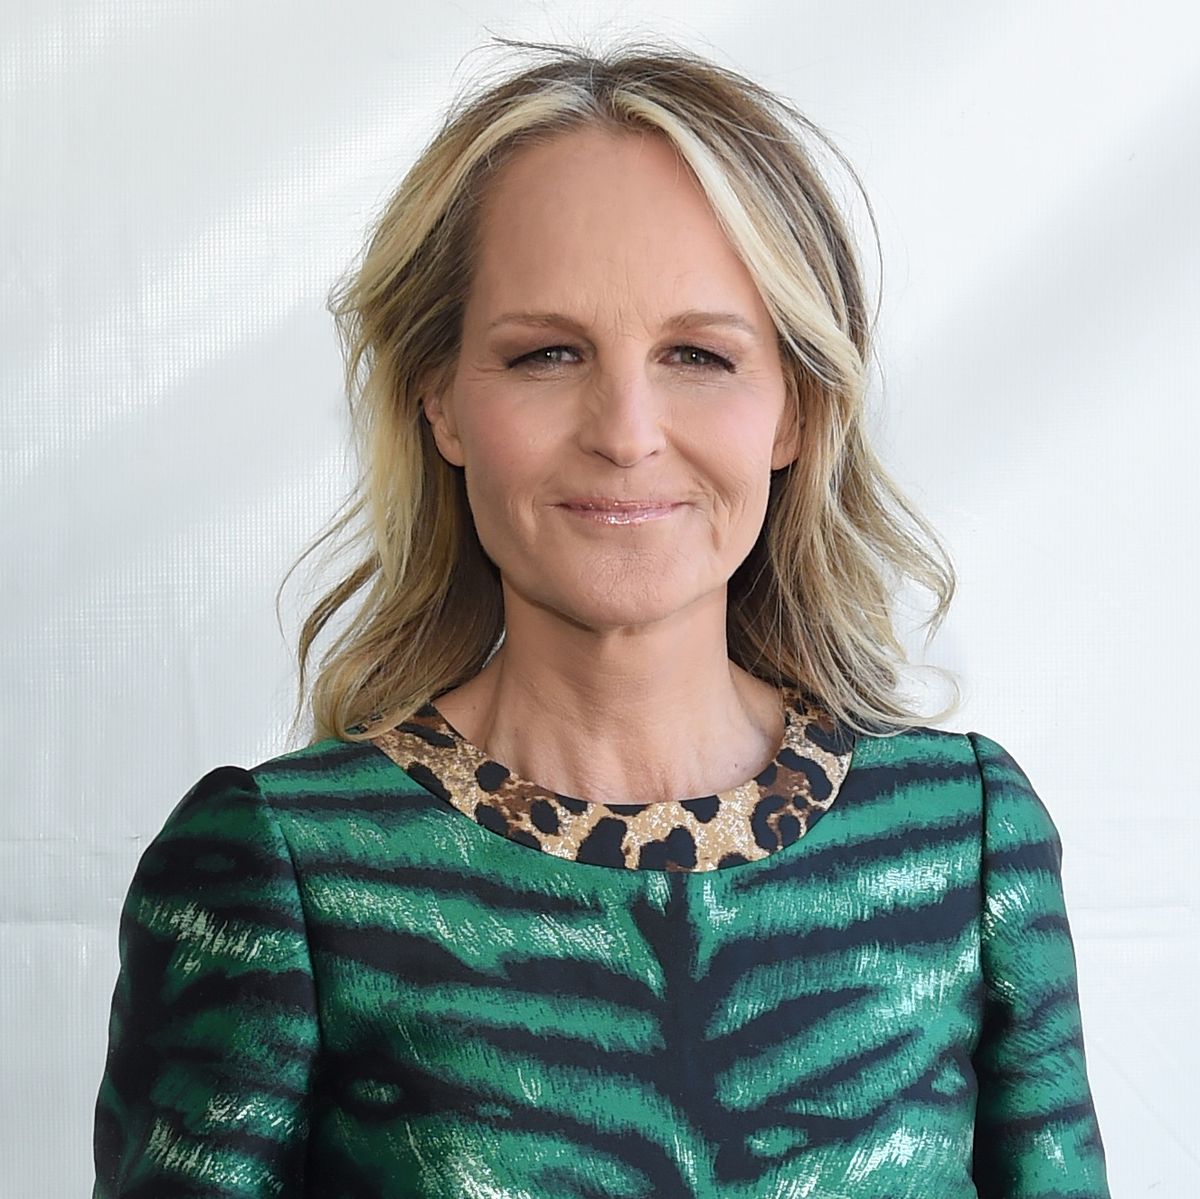 2022 Film Independent Spirit Awards - General Atmosphere SANTA MONICA, CALIFORNIA - MARCH 06: Actress Helen Hunt attends the 2022 Film Independent Spirit Awards on March 06, 2022 in Santa Monica, California. (Photo by Amanda Edwards/Getty Images)